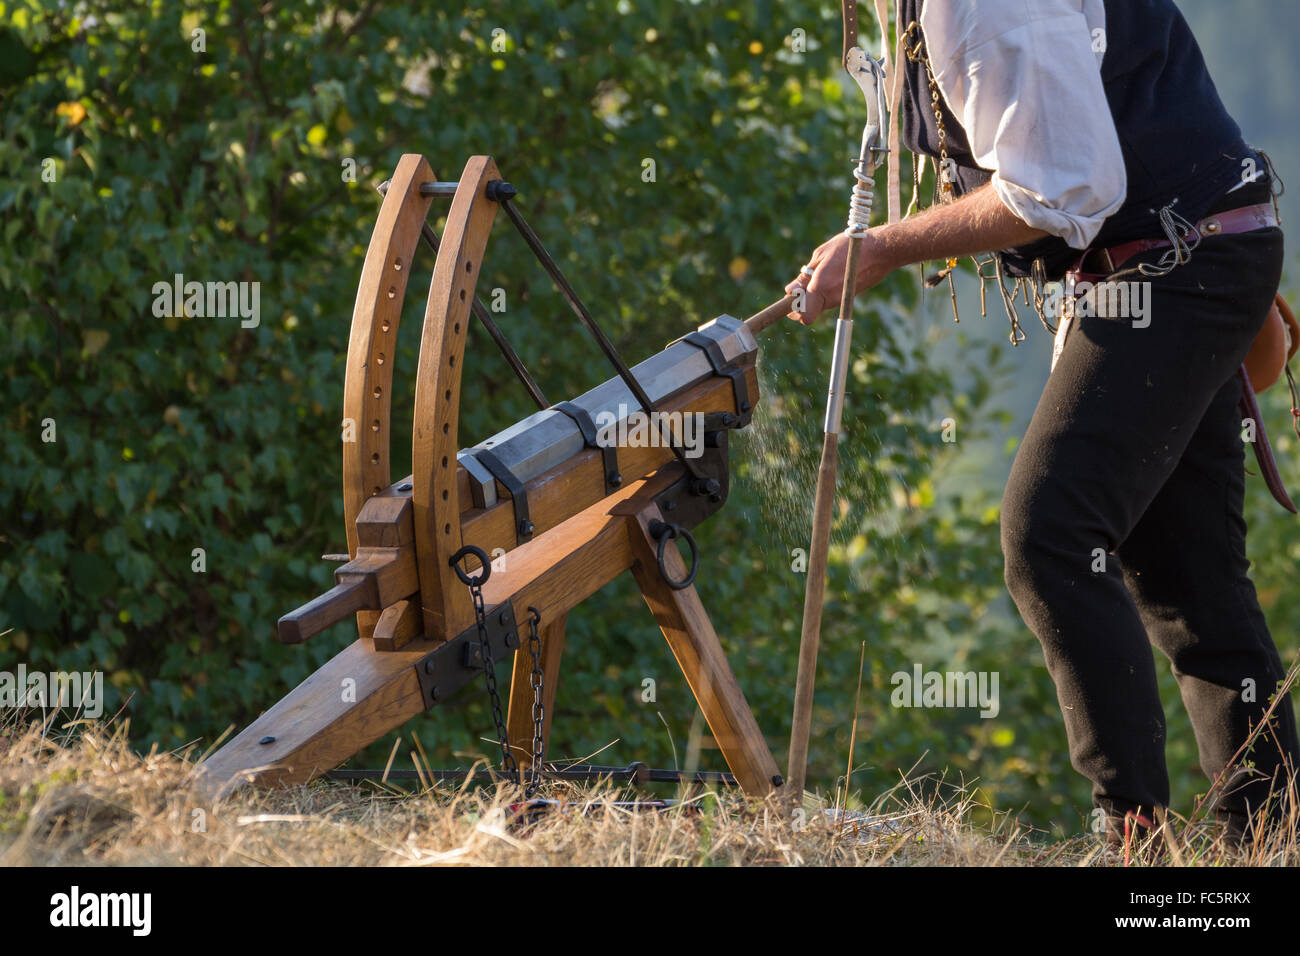 Cannon is freshly loaded Stock Photo